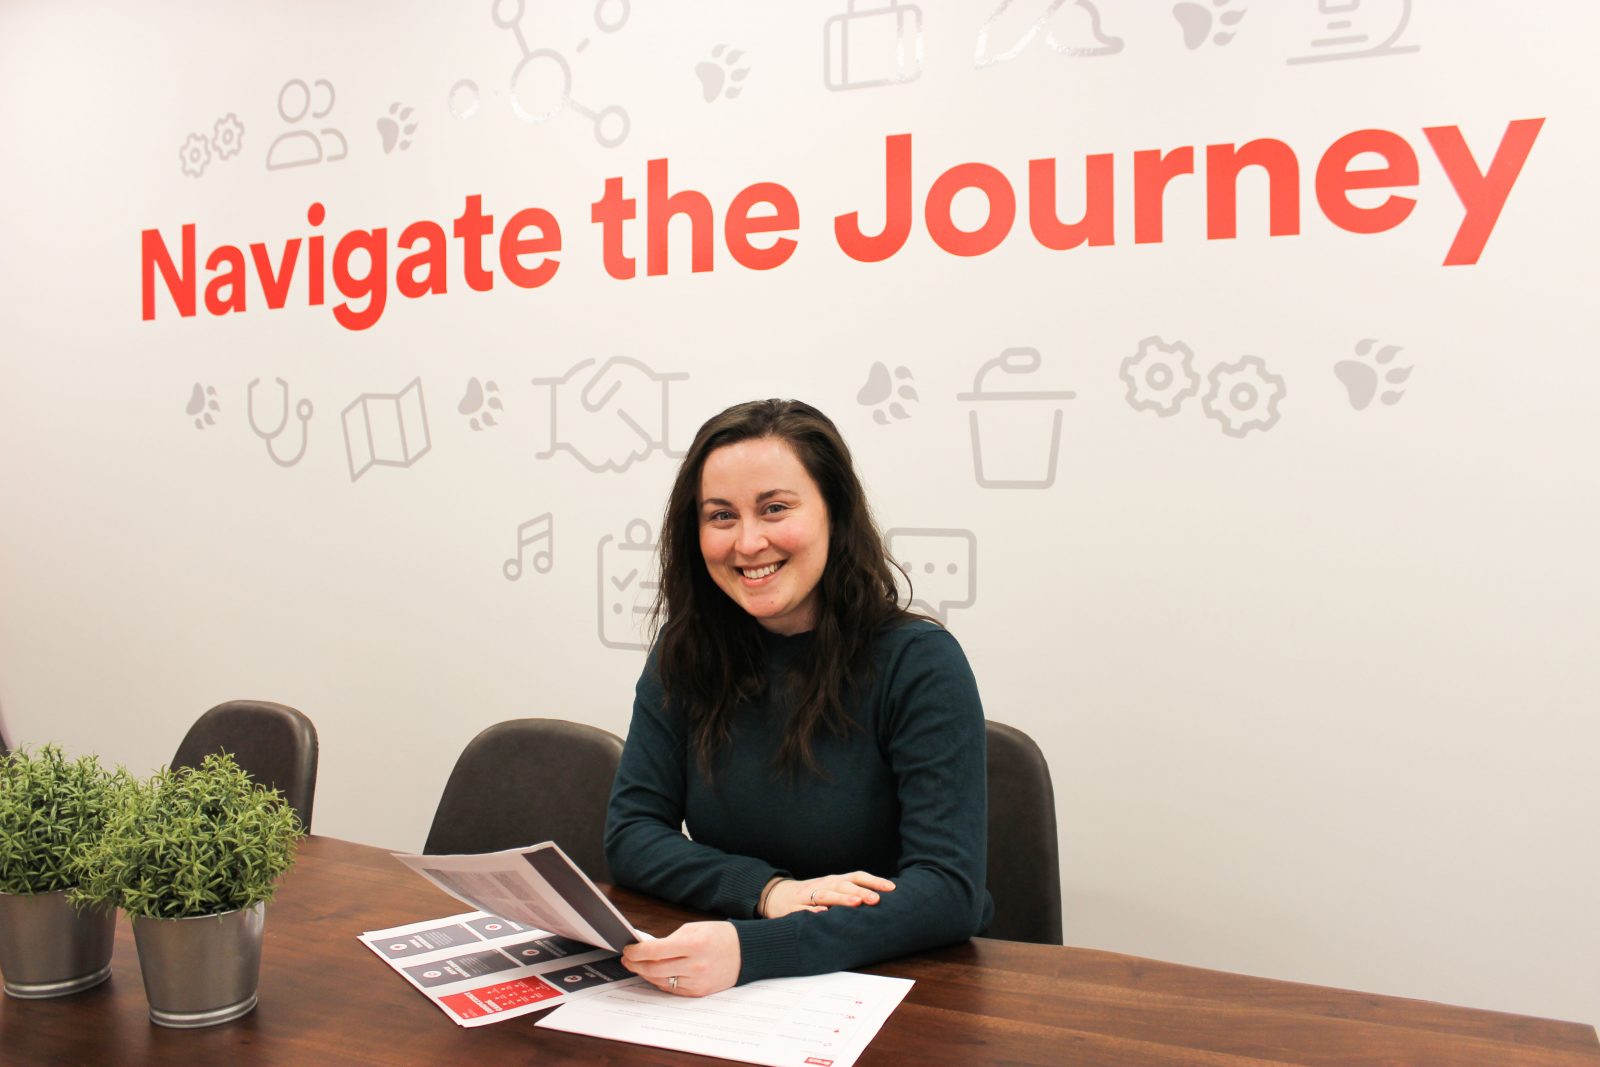 A woman sits at a desk smiling with papers in her hand. A sign on the wall behind her reads 'Navigate the Journey.'